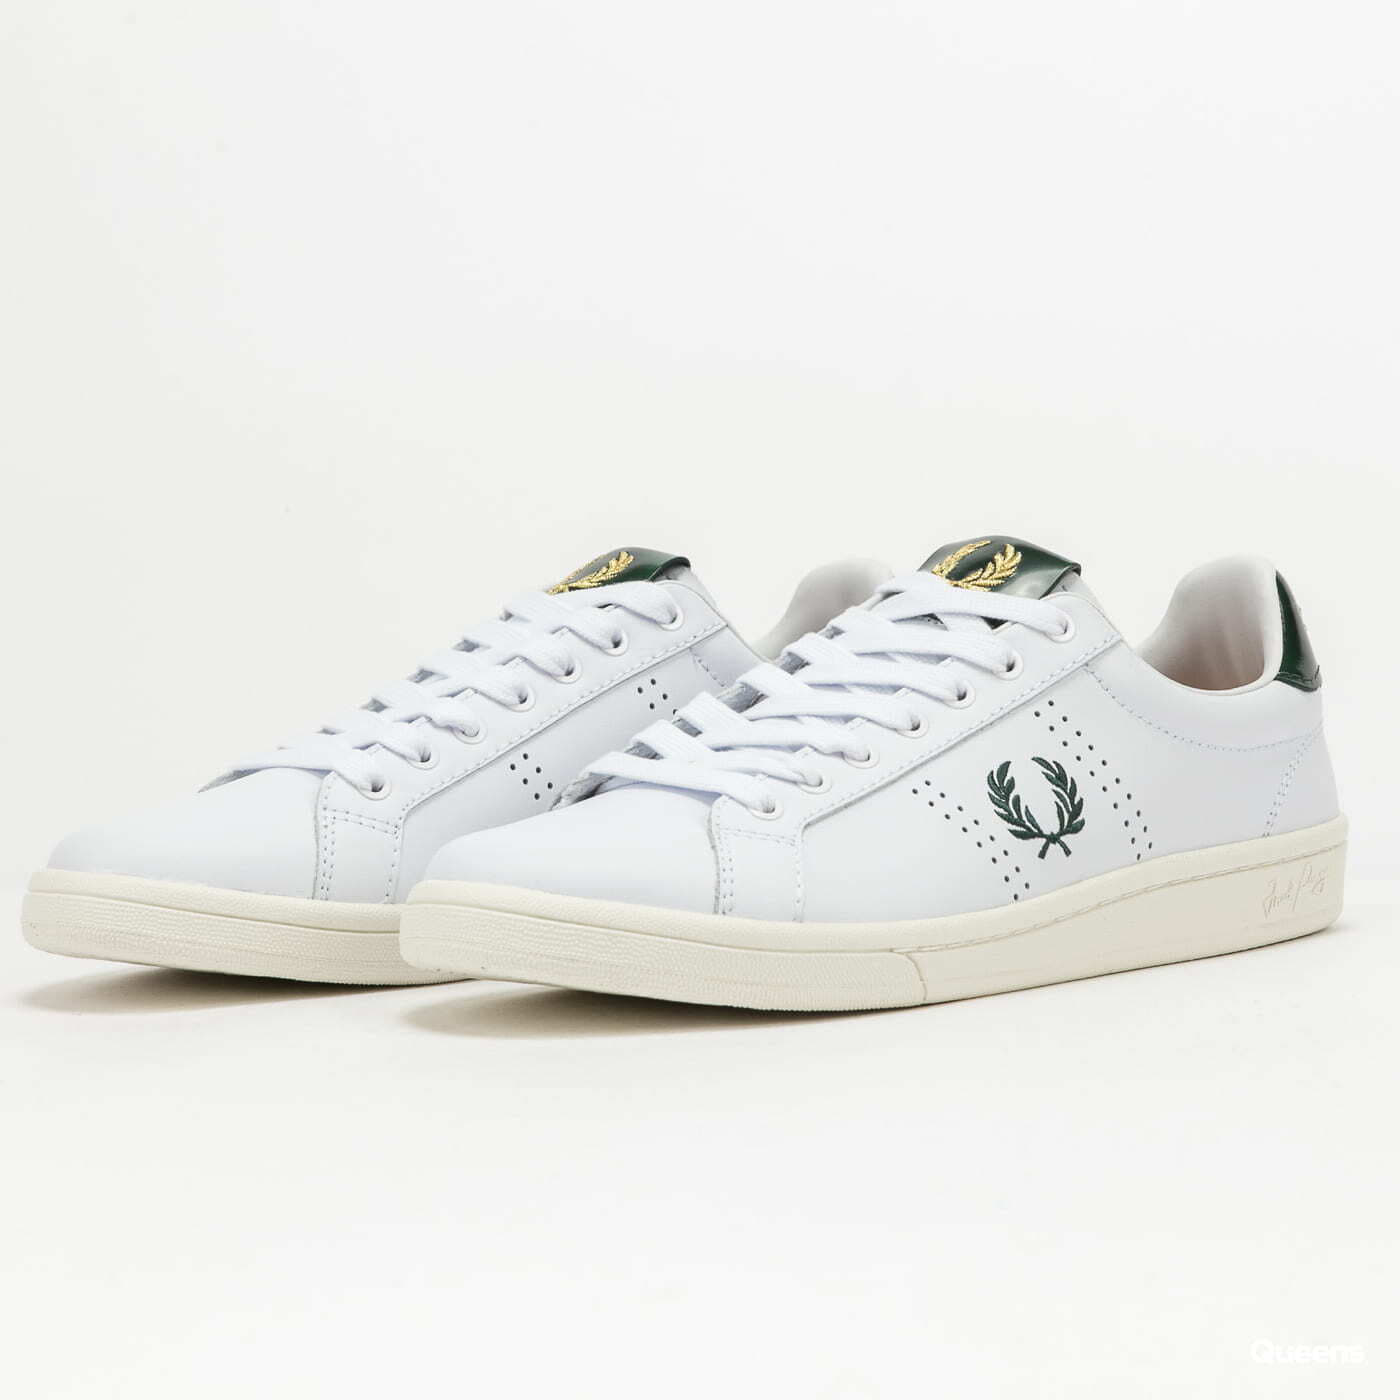 Men's shoes FRED PERRY B721 Leather Tab white